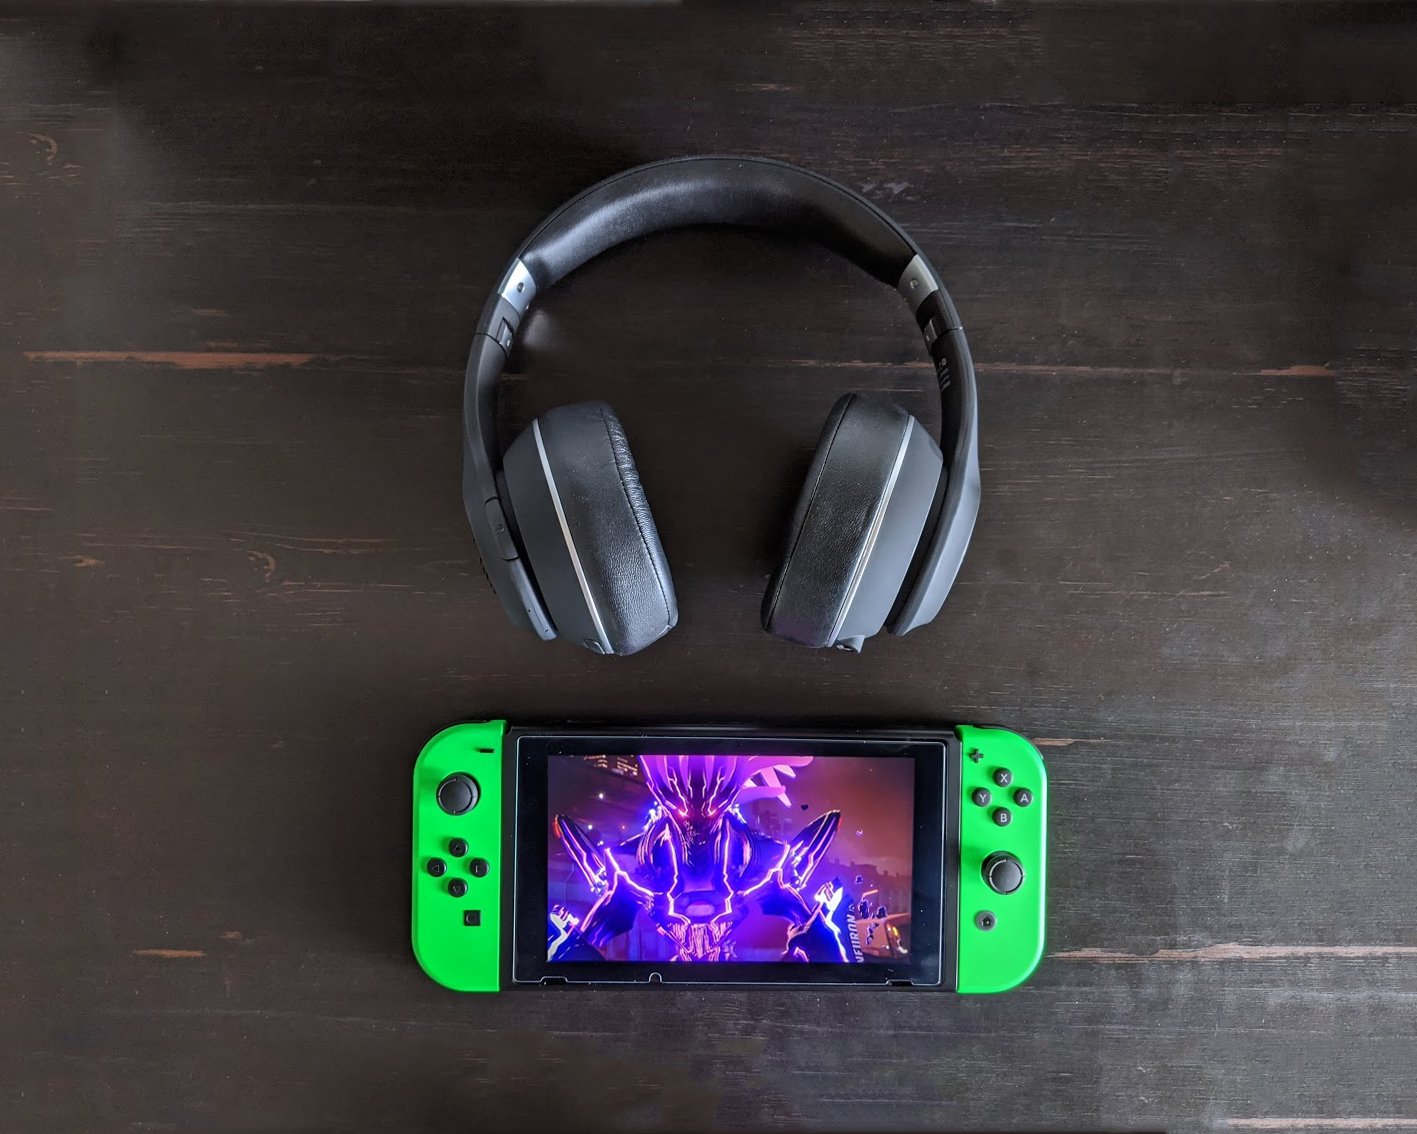 Bluetooth headset and Nintendo Switch